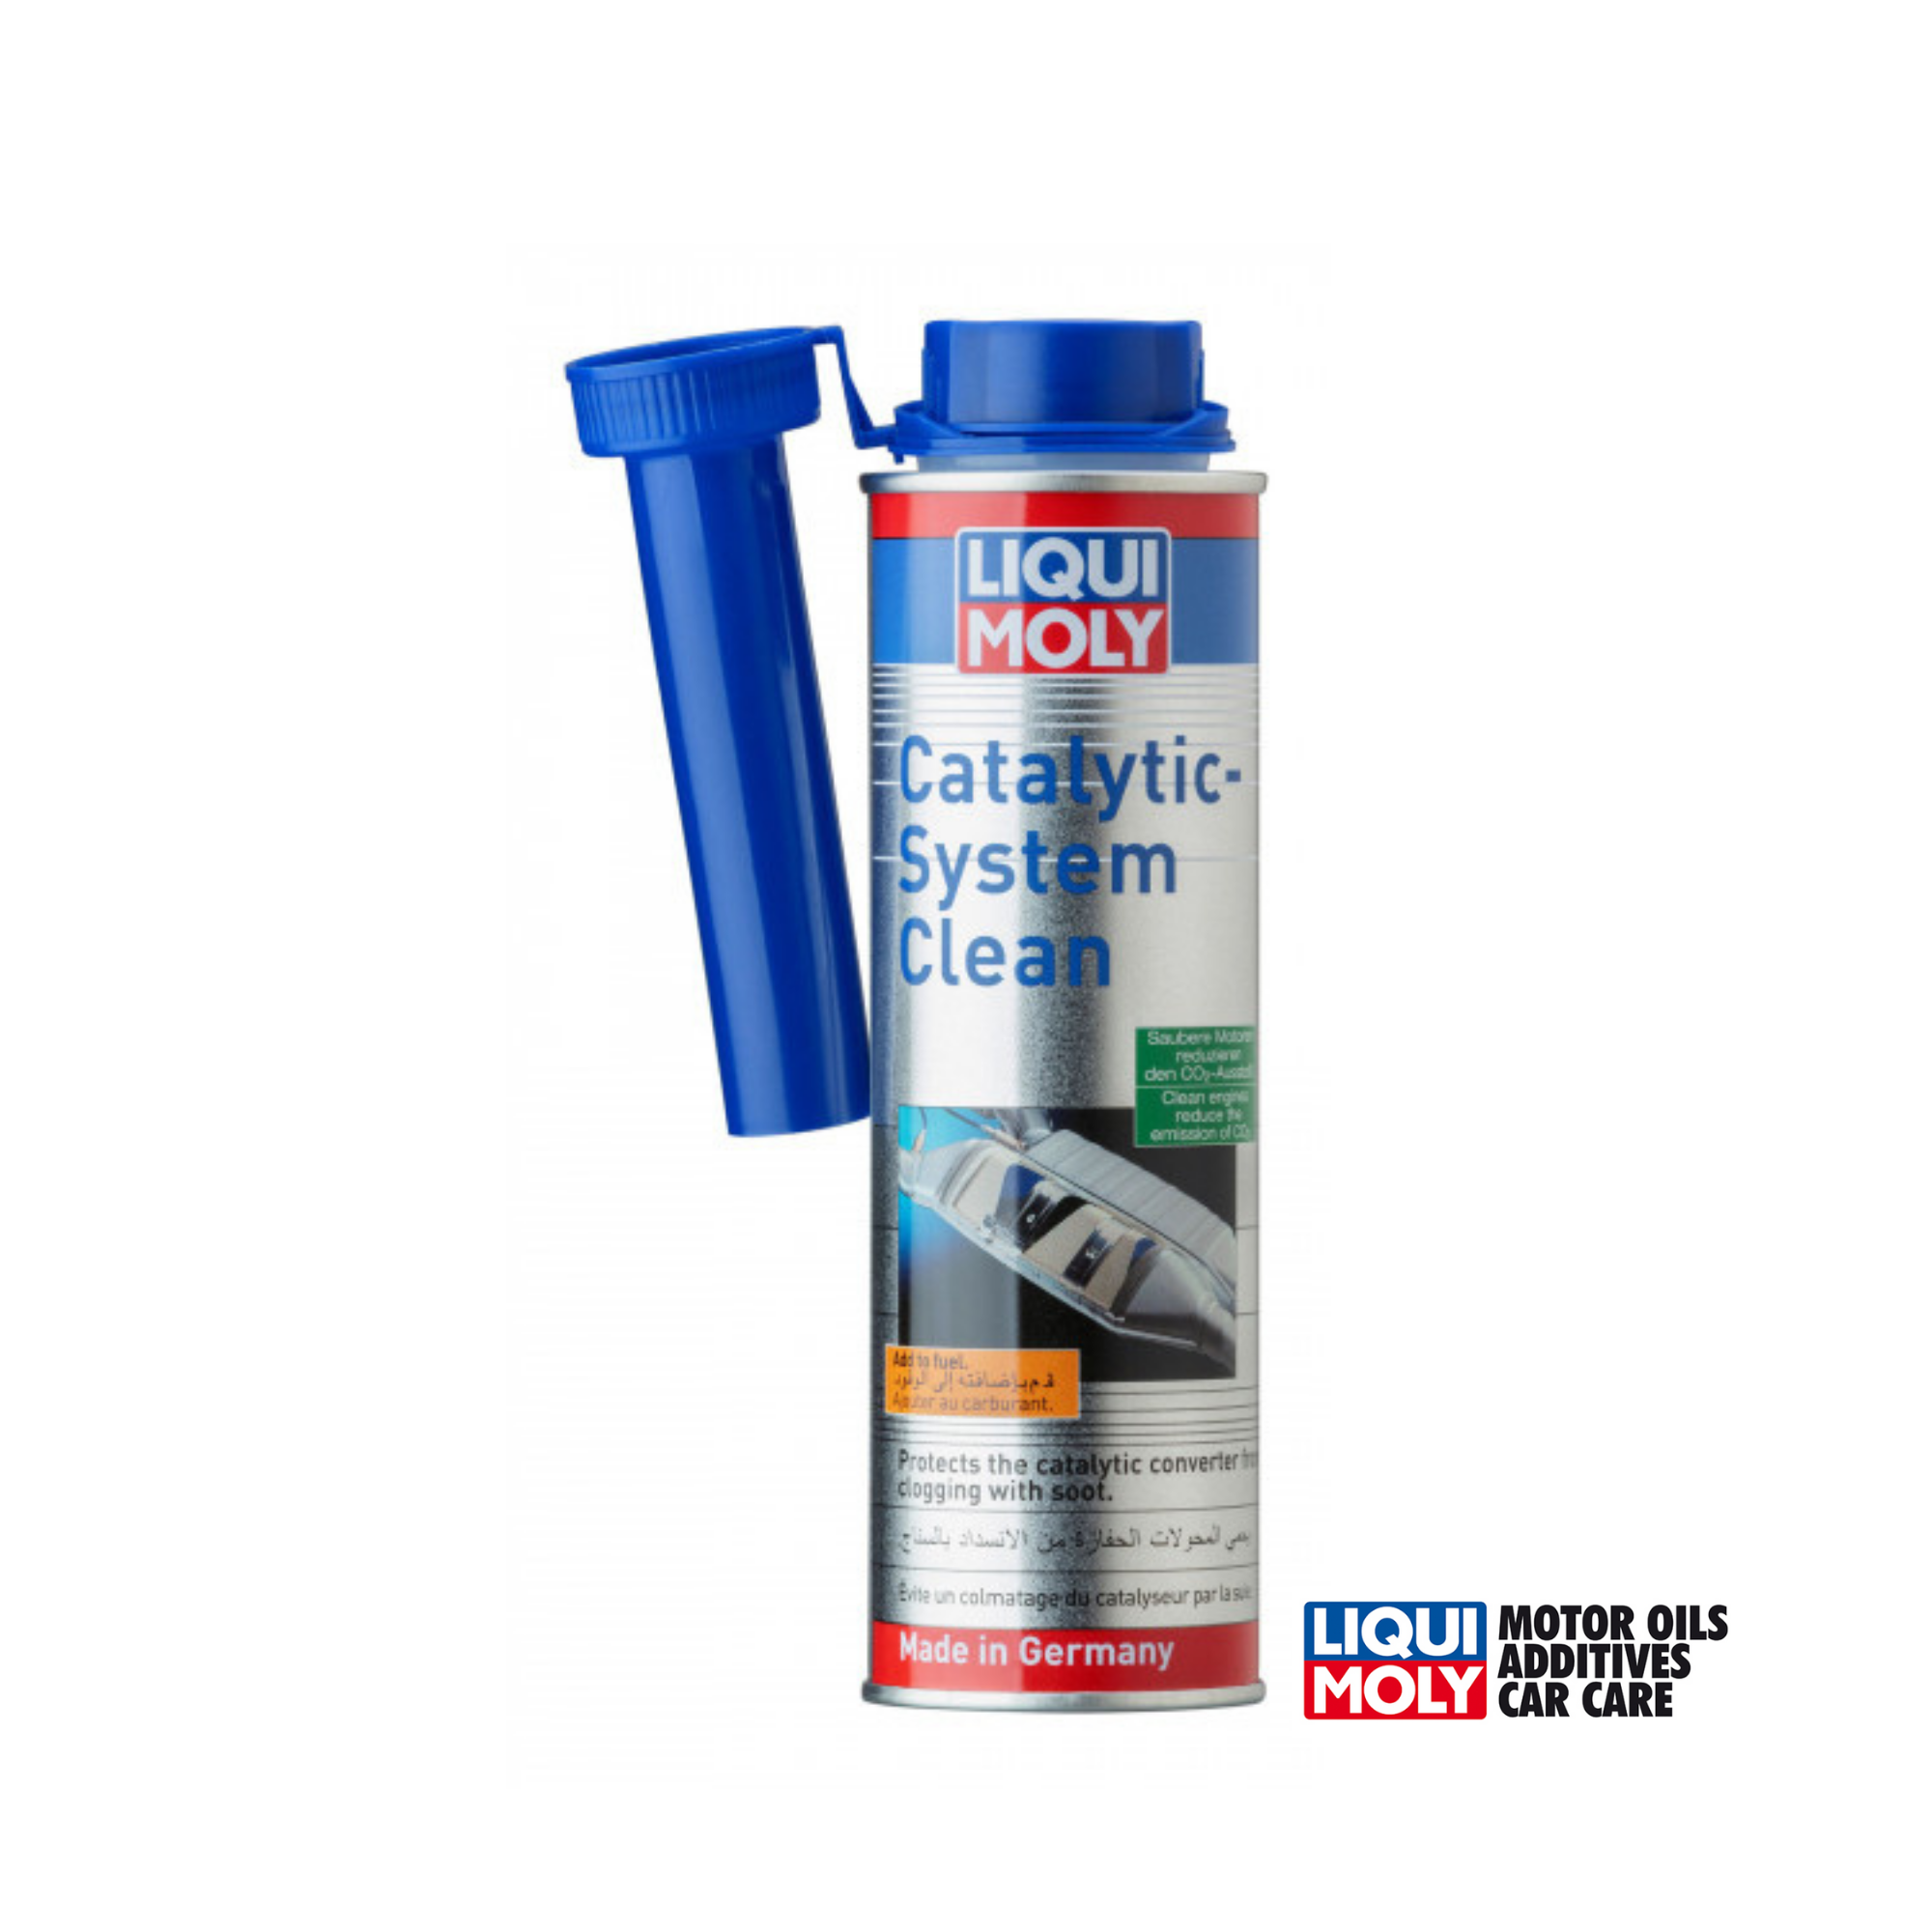 CATALYTIC SYSTEM CLEAN - LIQUI MOLY